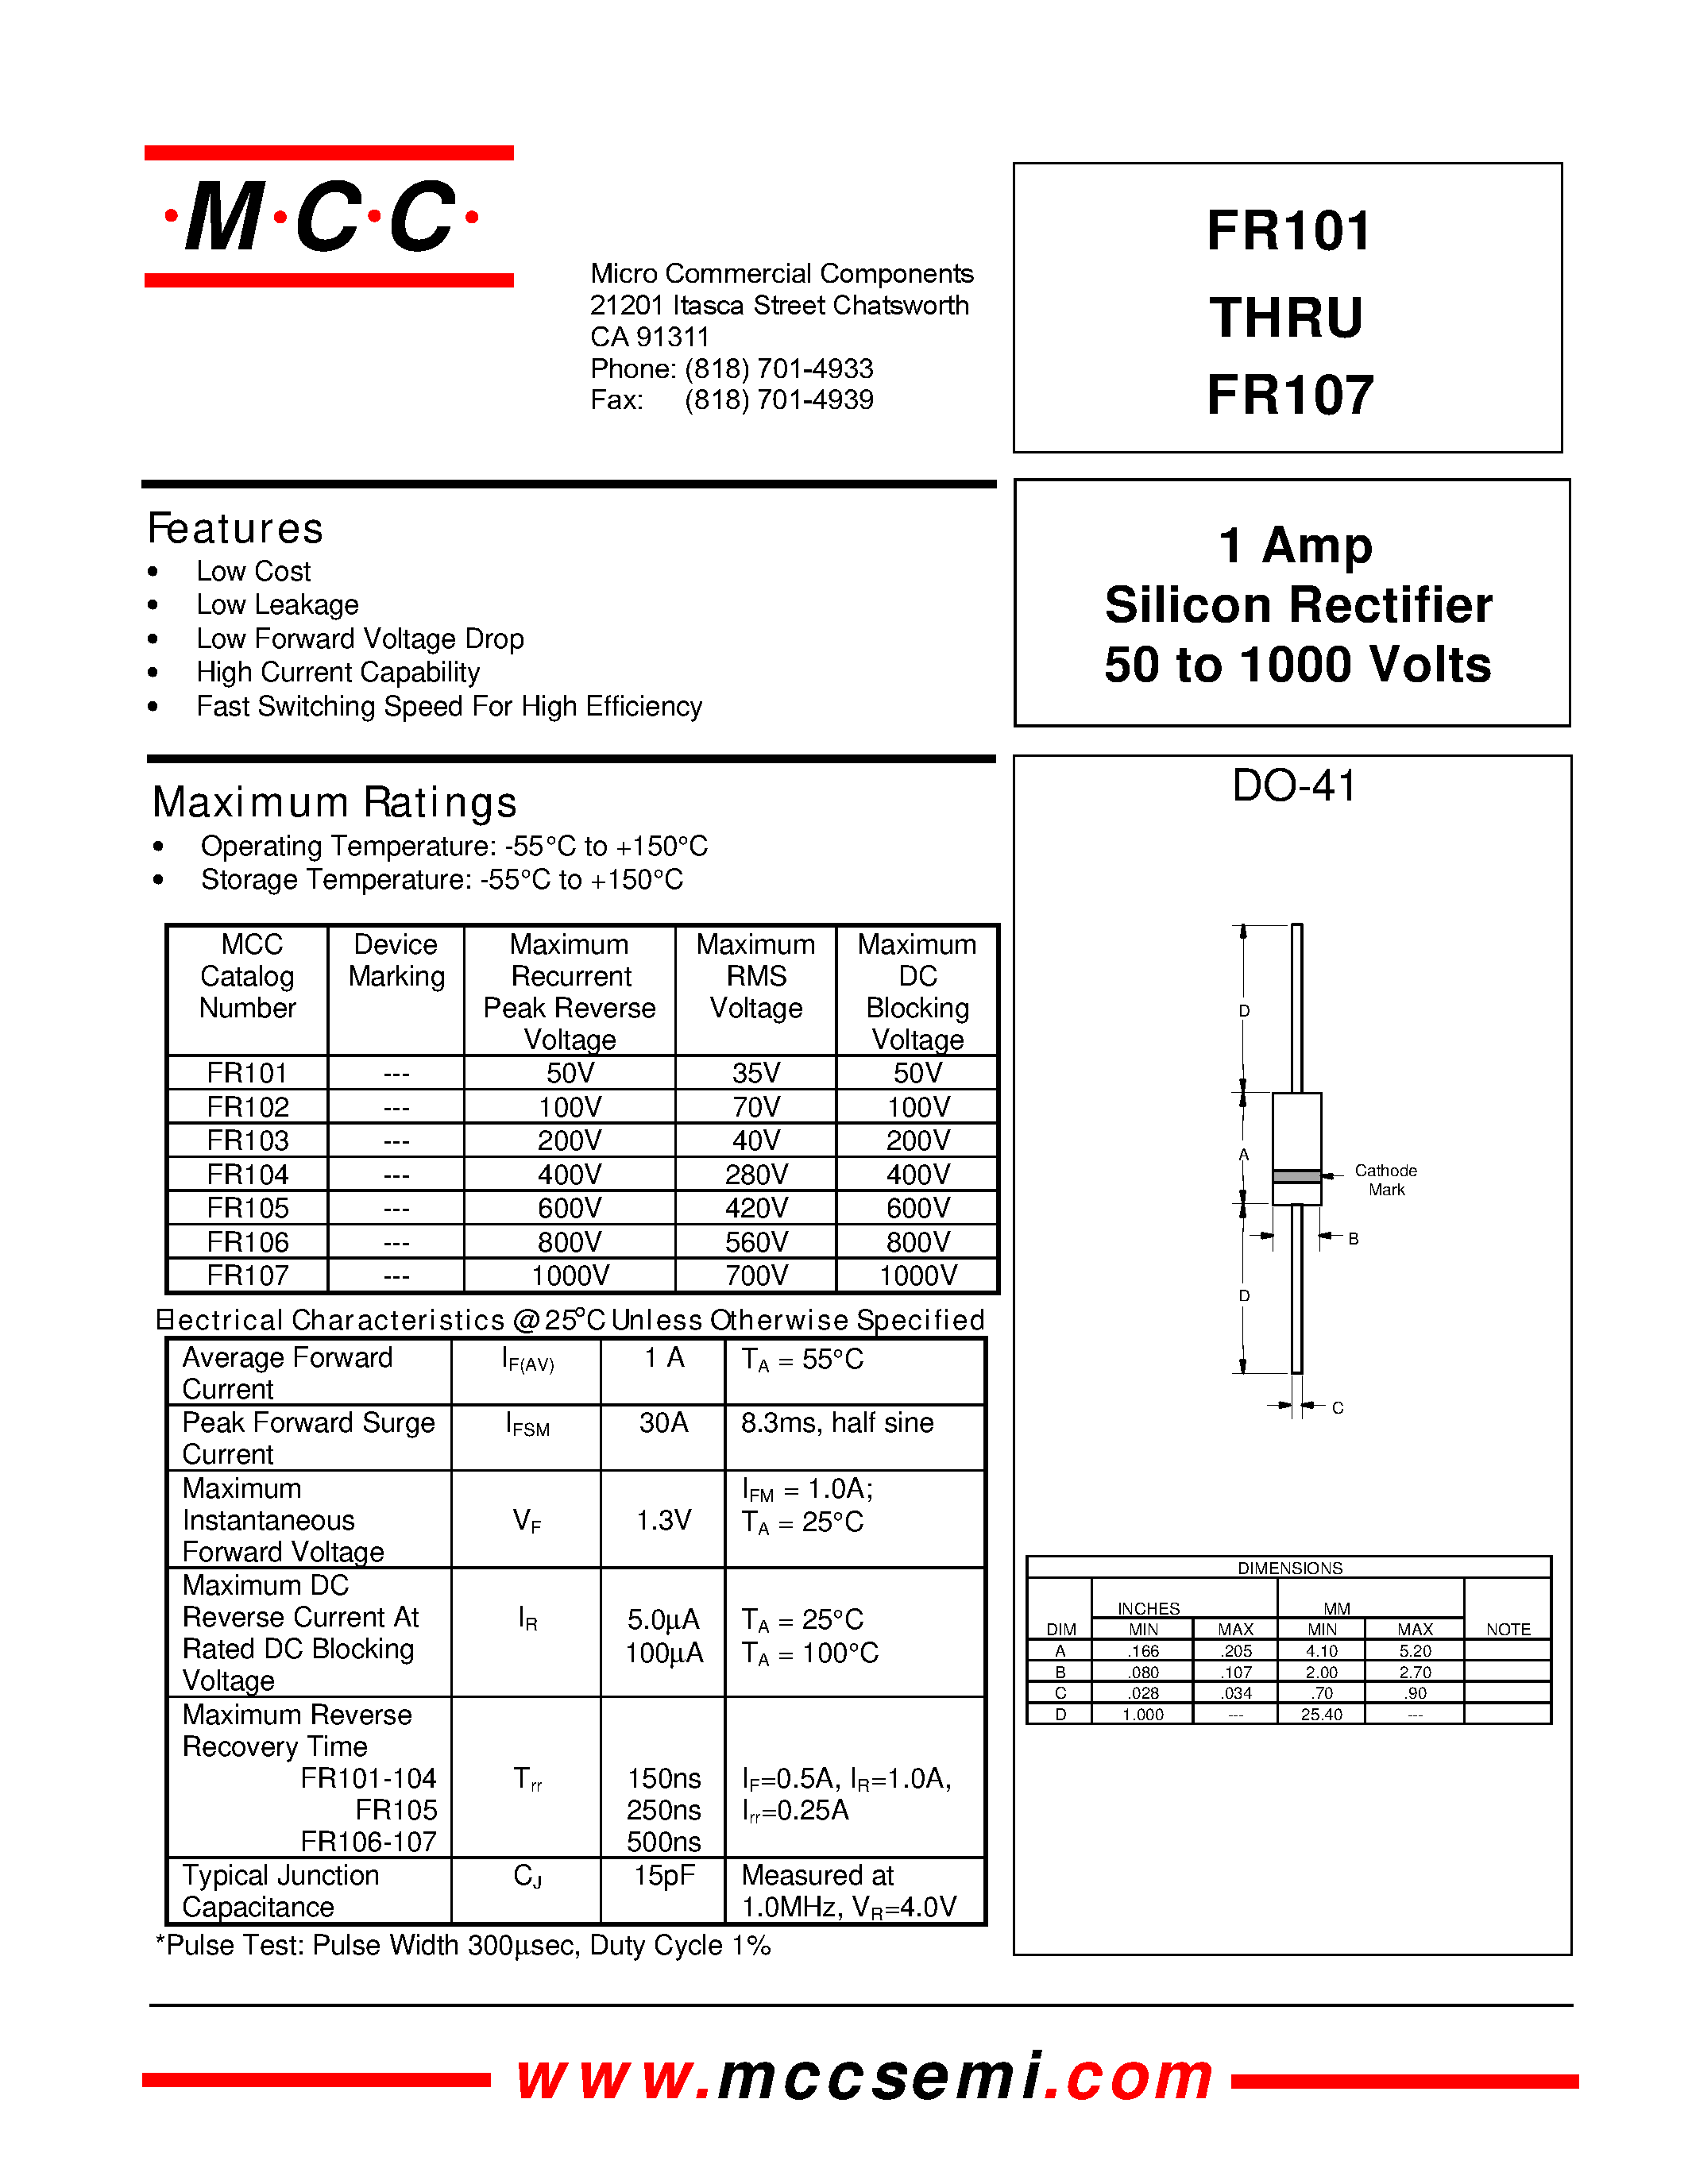 Datasheet FR101 - 1 Amp Silicon Rectifier 50 to 1000 Volts page 1